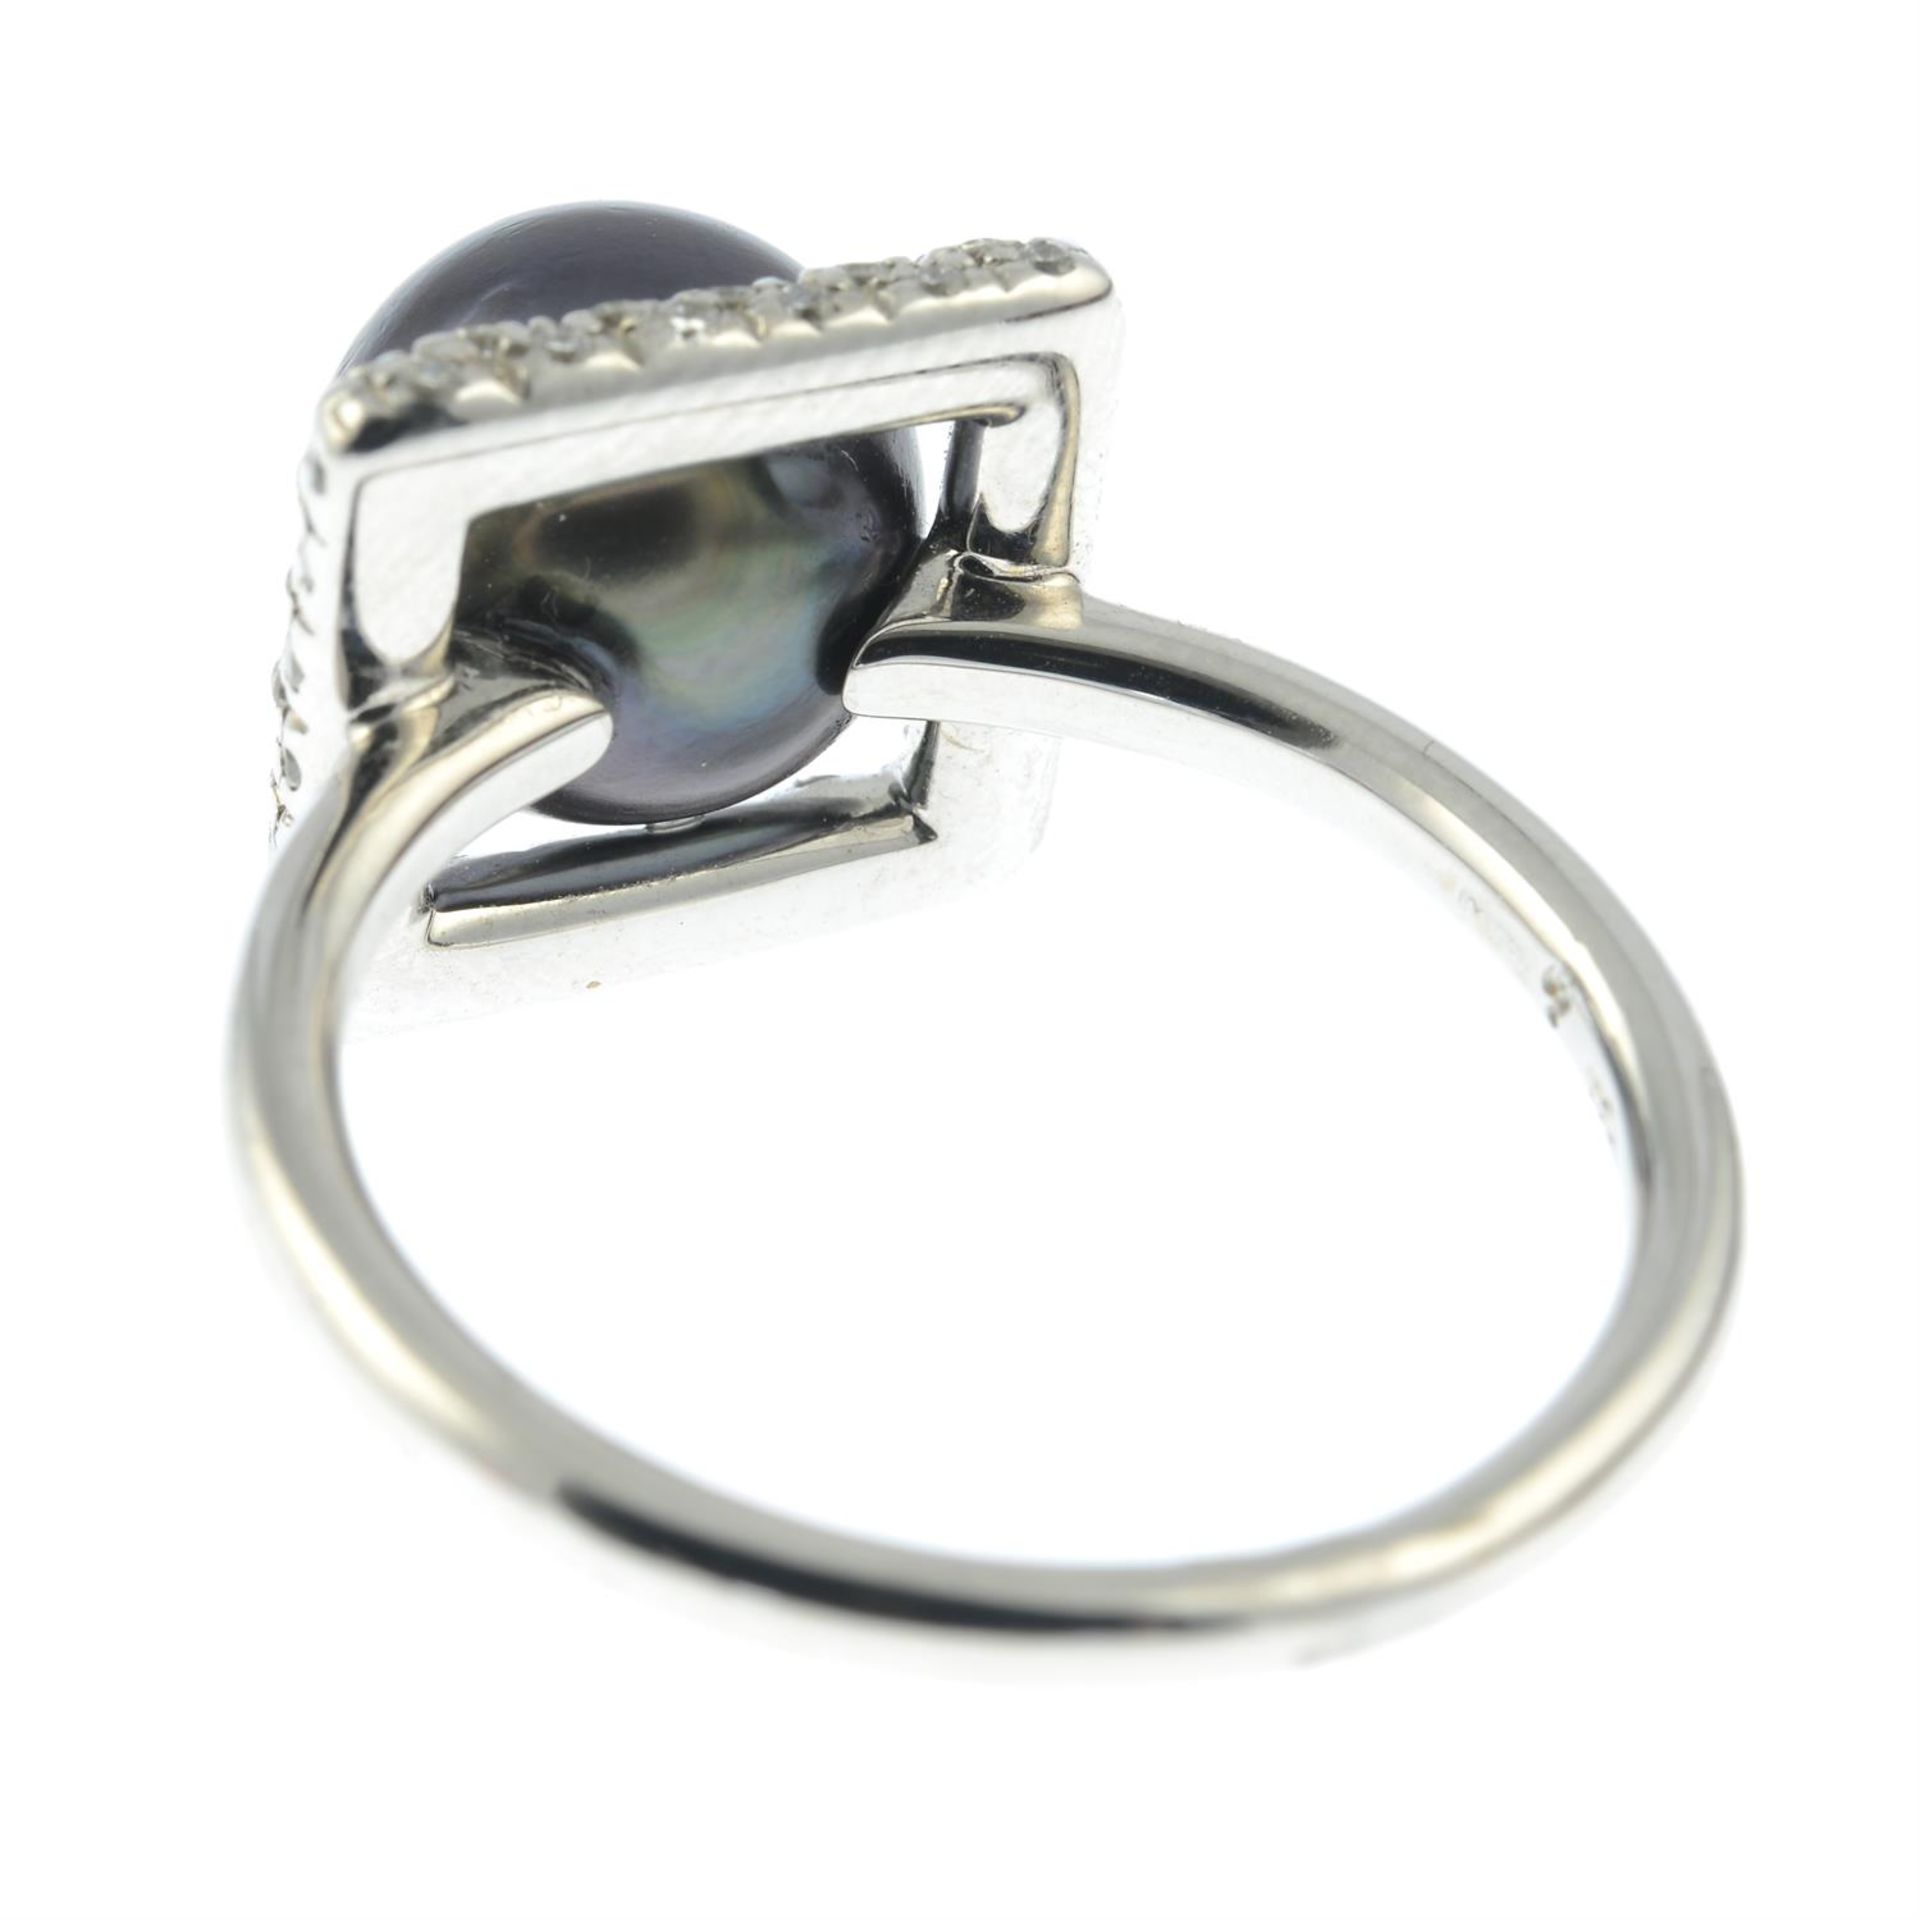 An 18ct gold 'Tahitian' cultured pearl and diamond ring, by Mikimoto. - Image 3 of 6